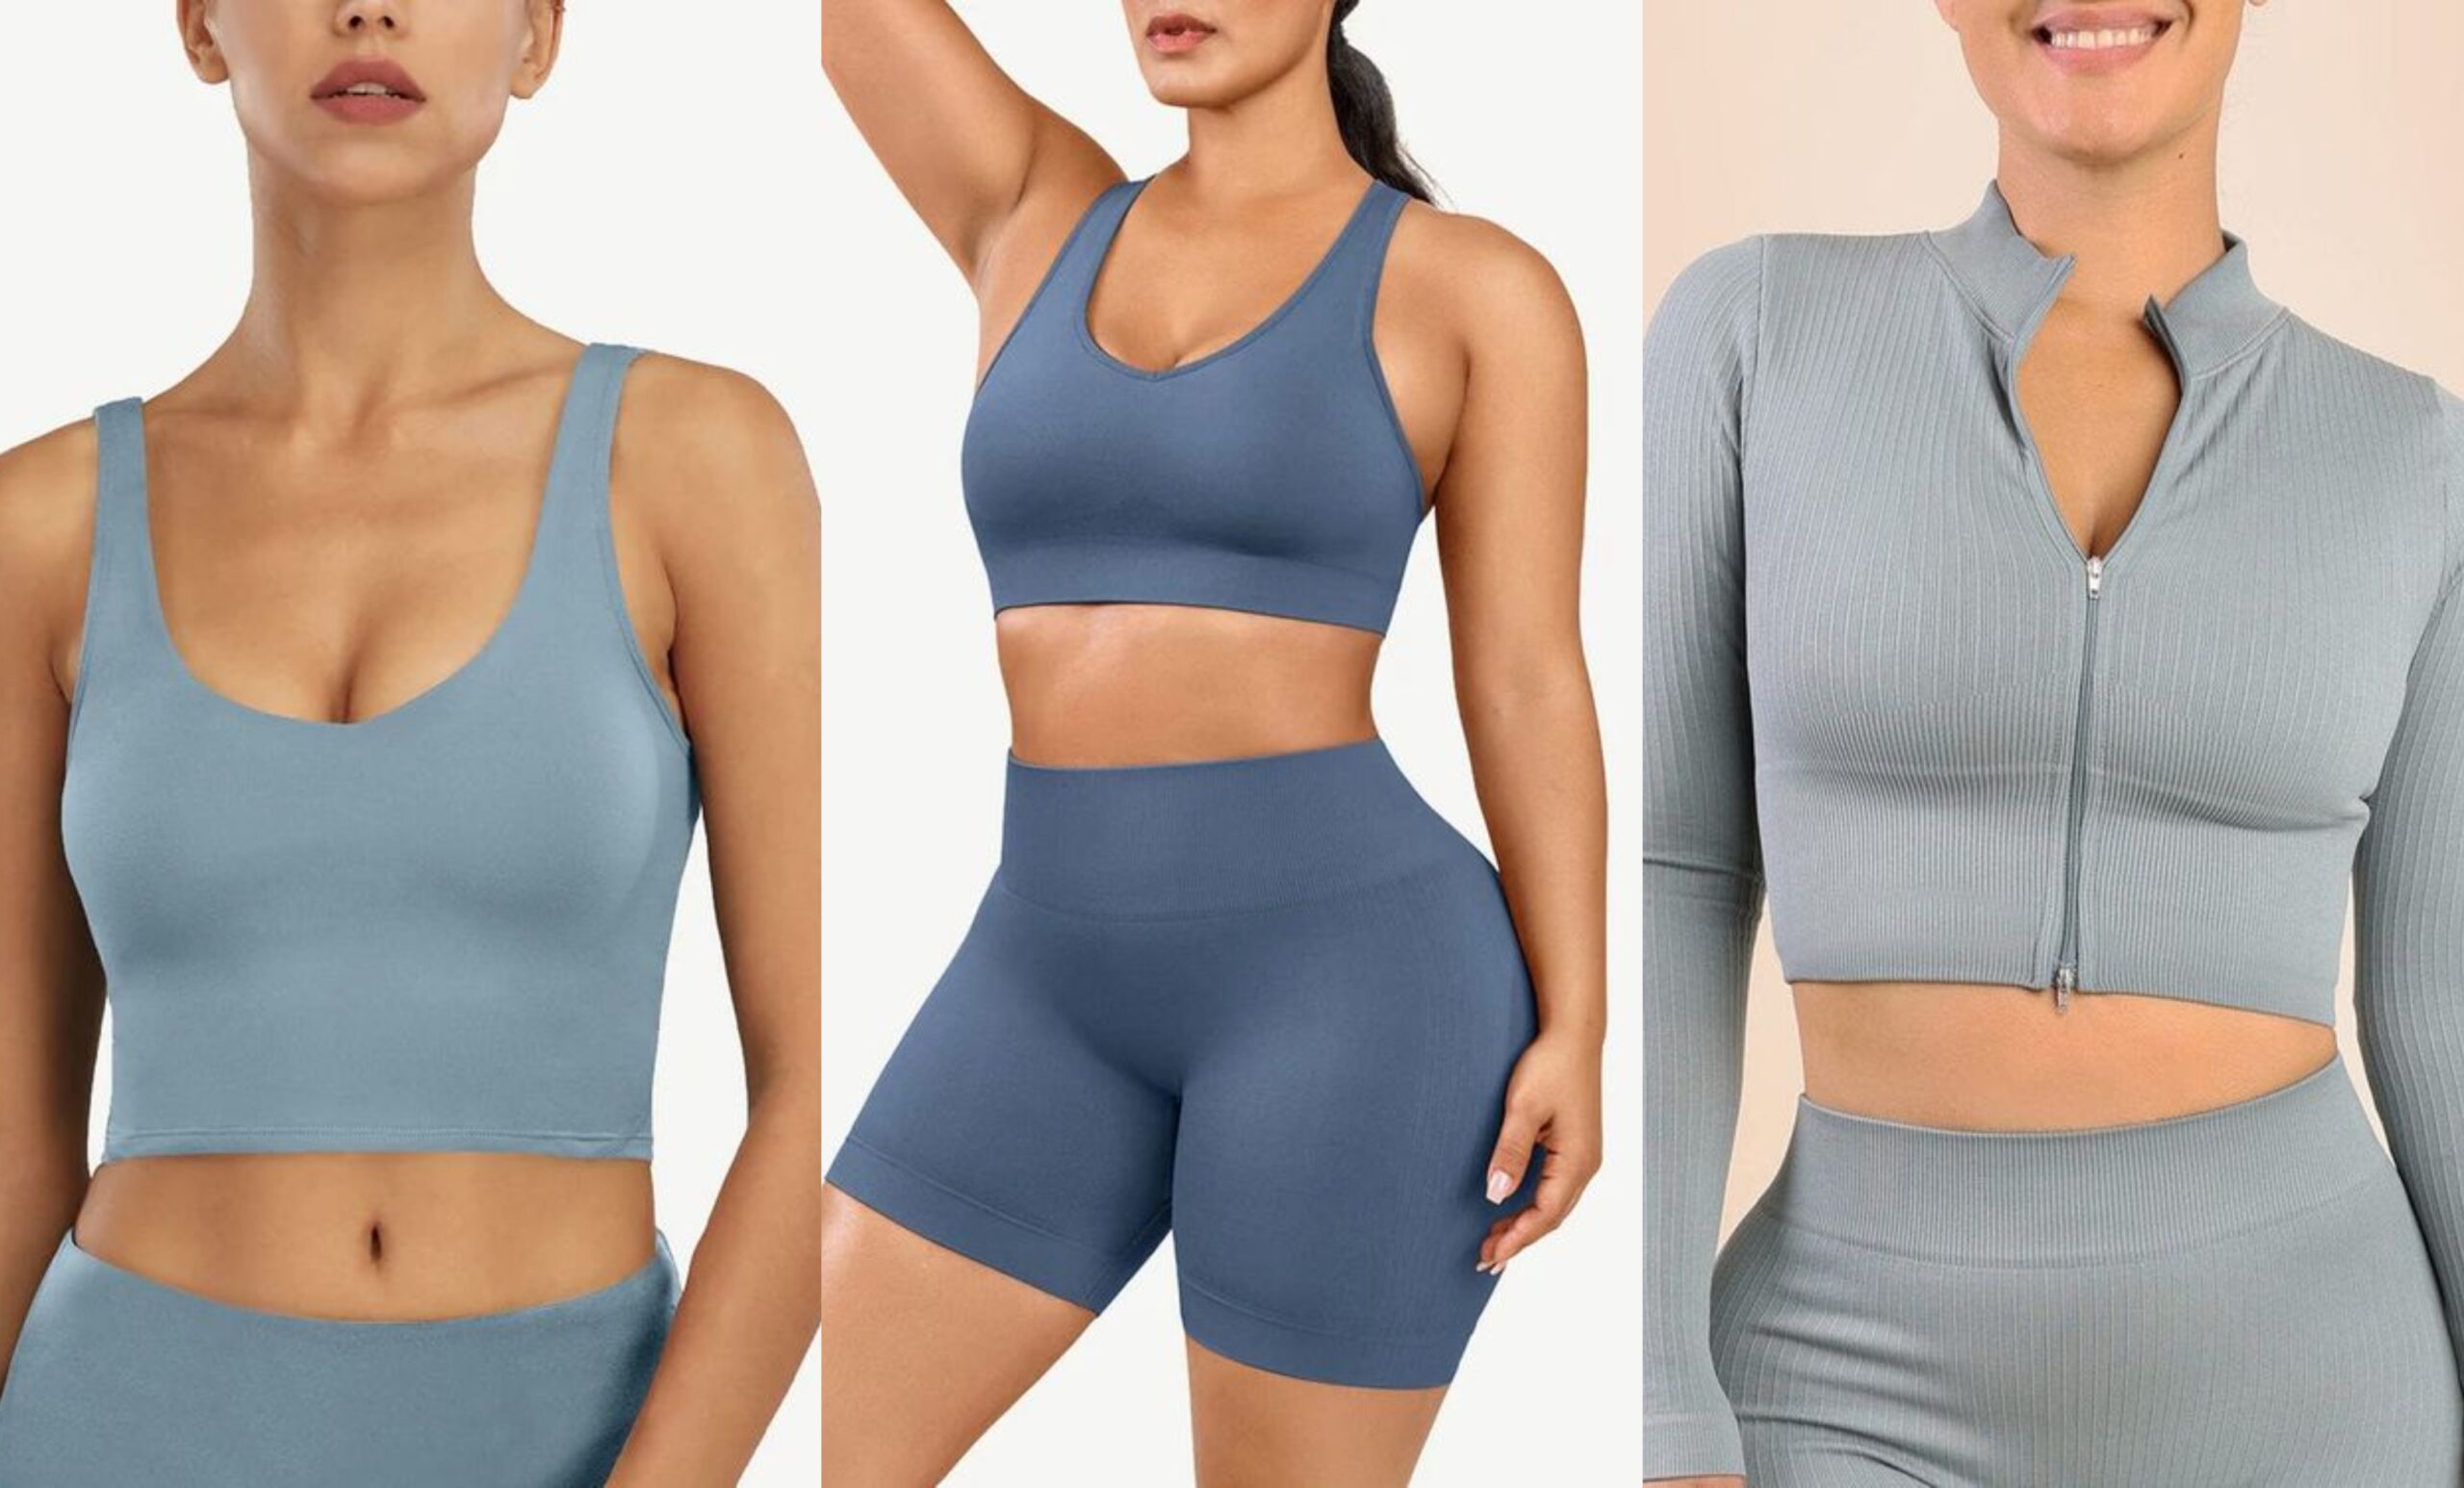 Trend Alert: Commuter-Ready Activewear is a must-have for Spring/Summer 2022